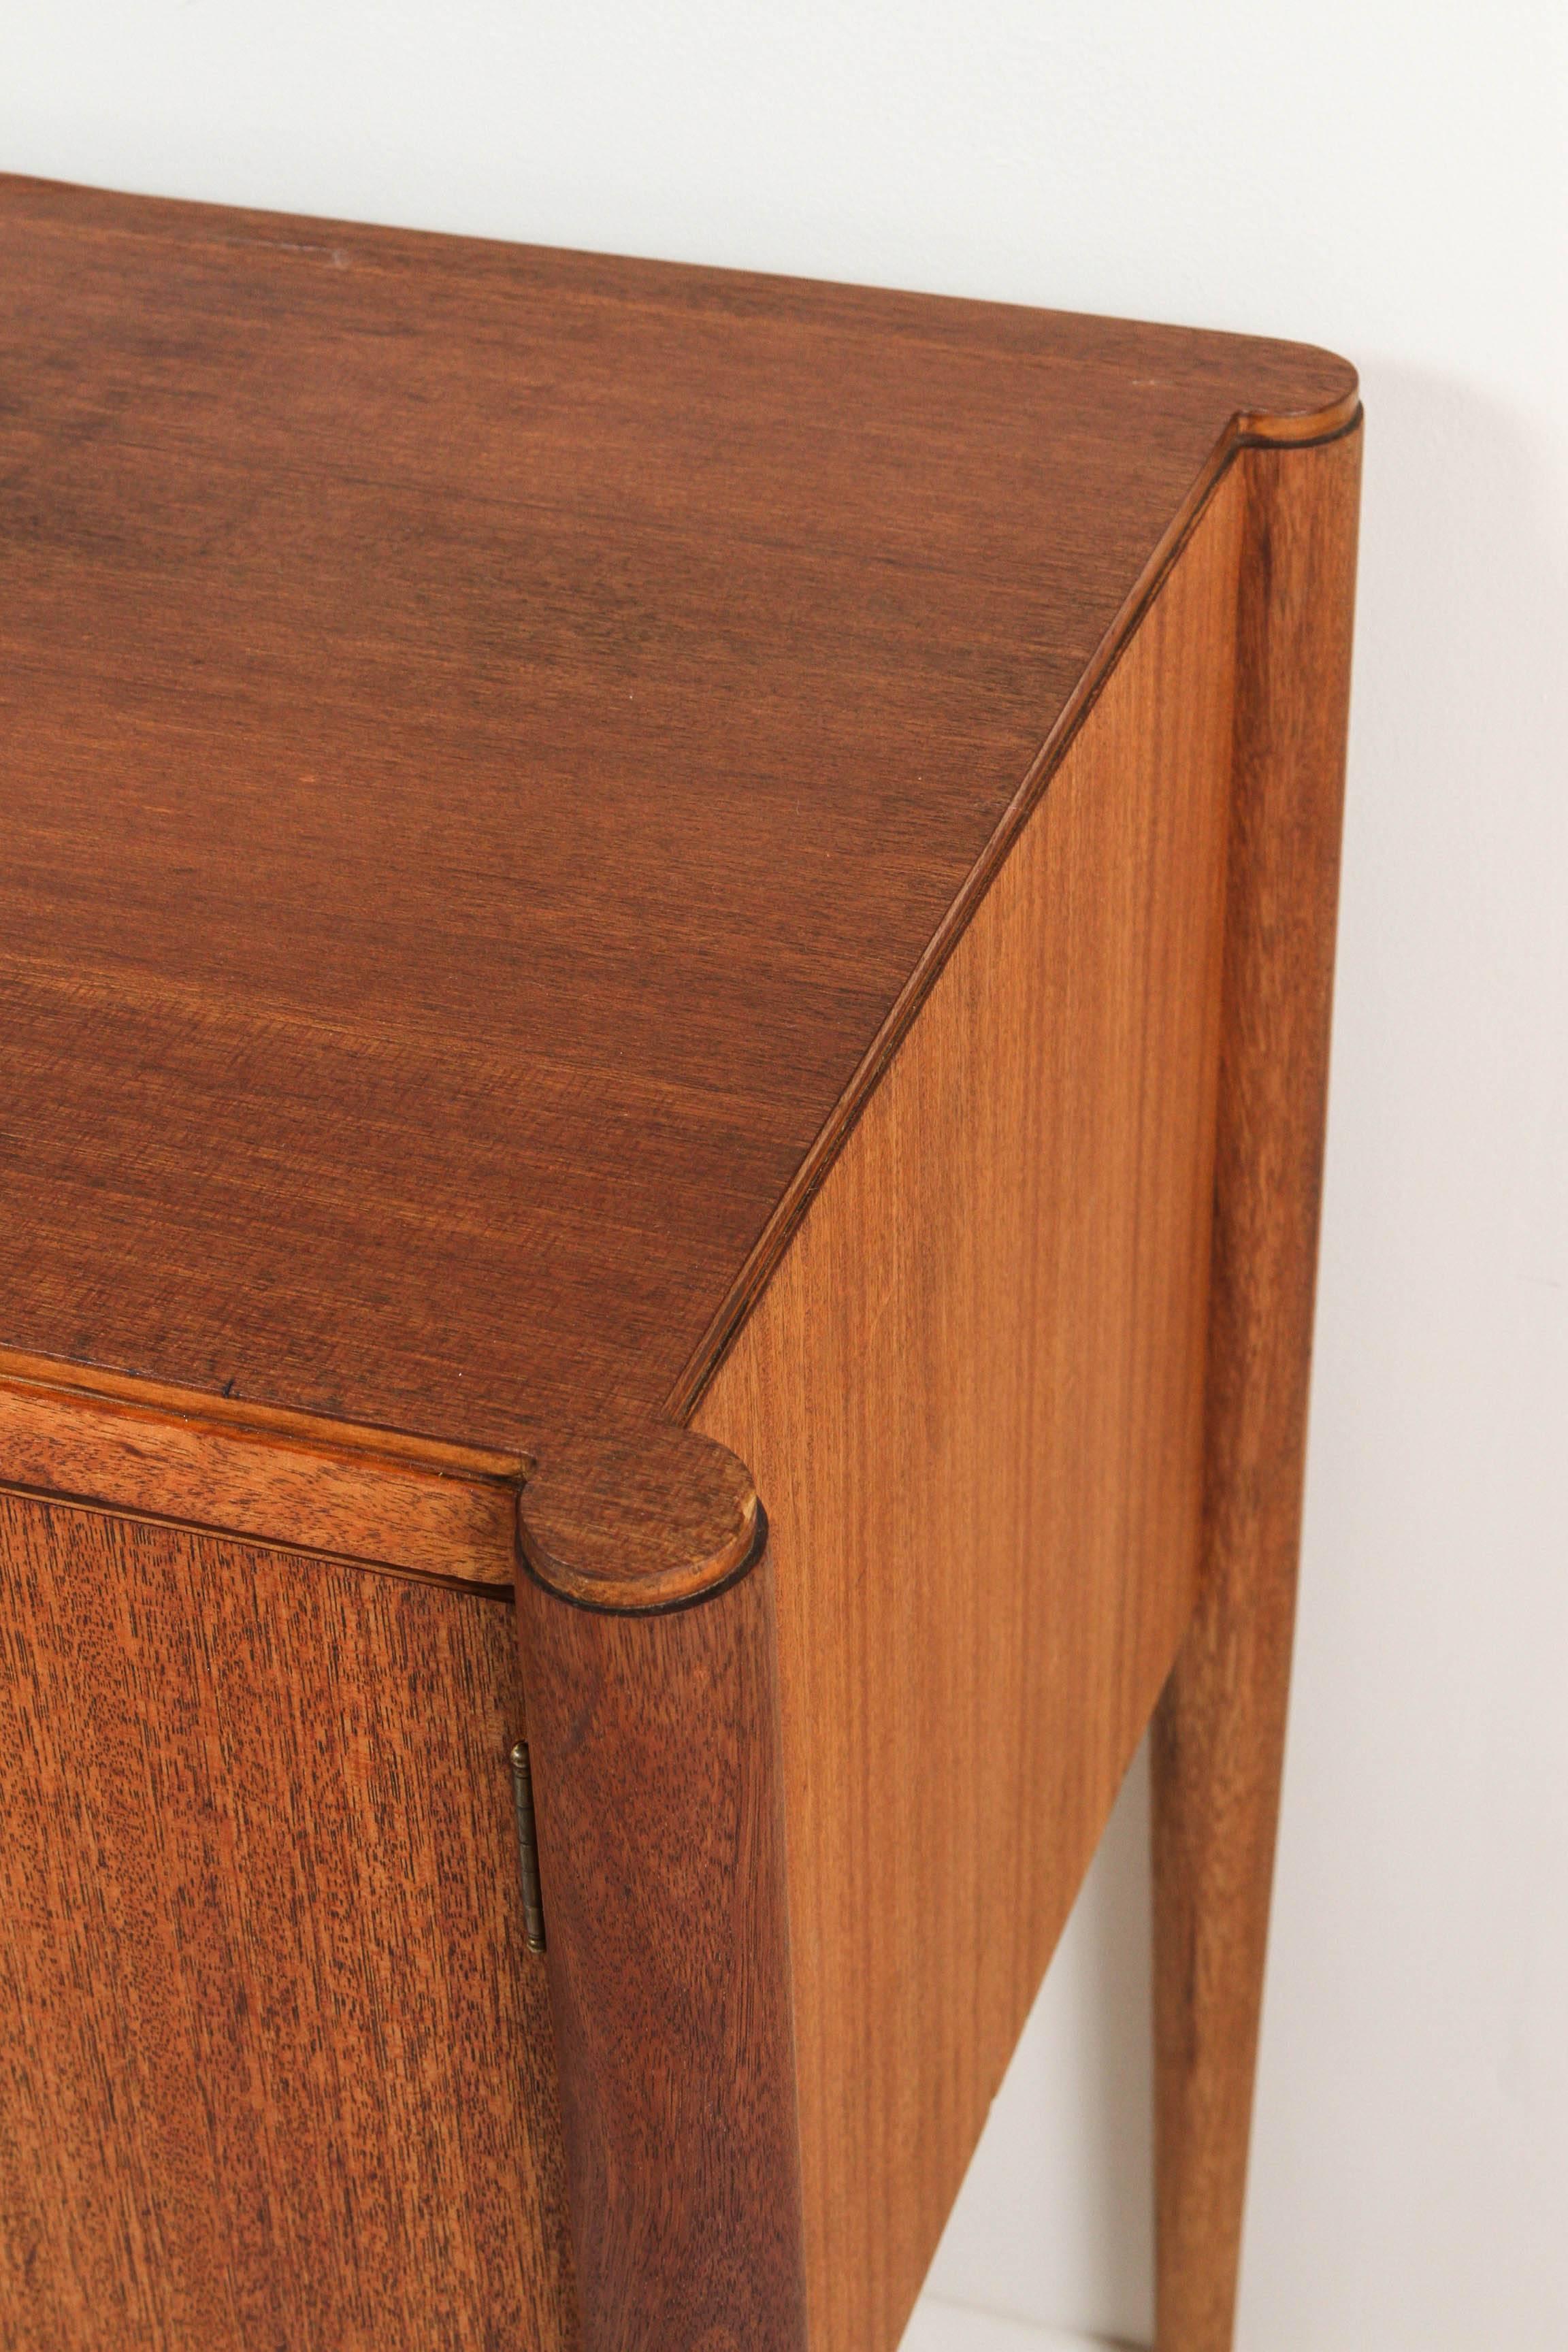 Paul Frankl Credenza for Brown Saltman In Excellent Condition For Sale In Santa Monica, CA